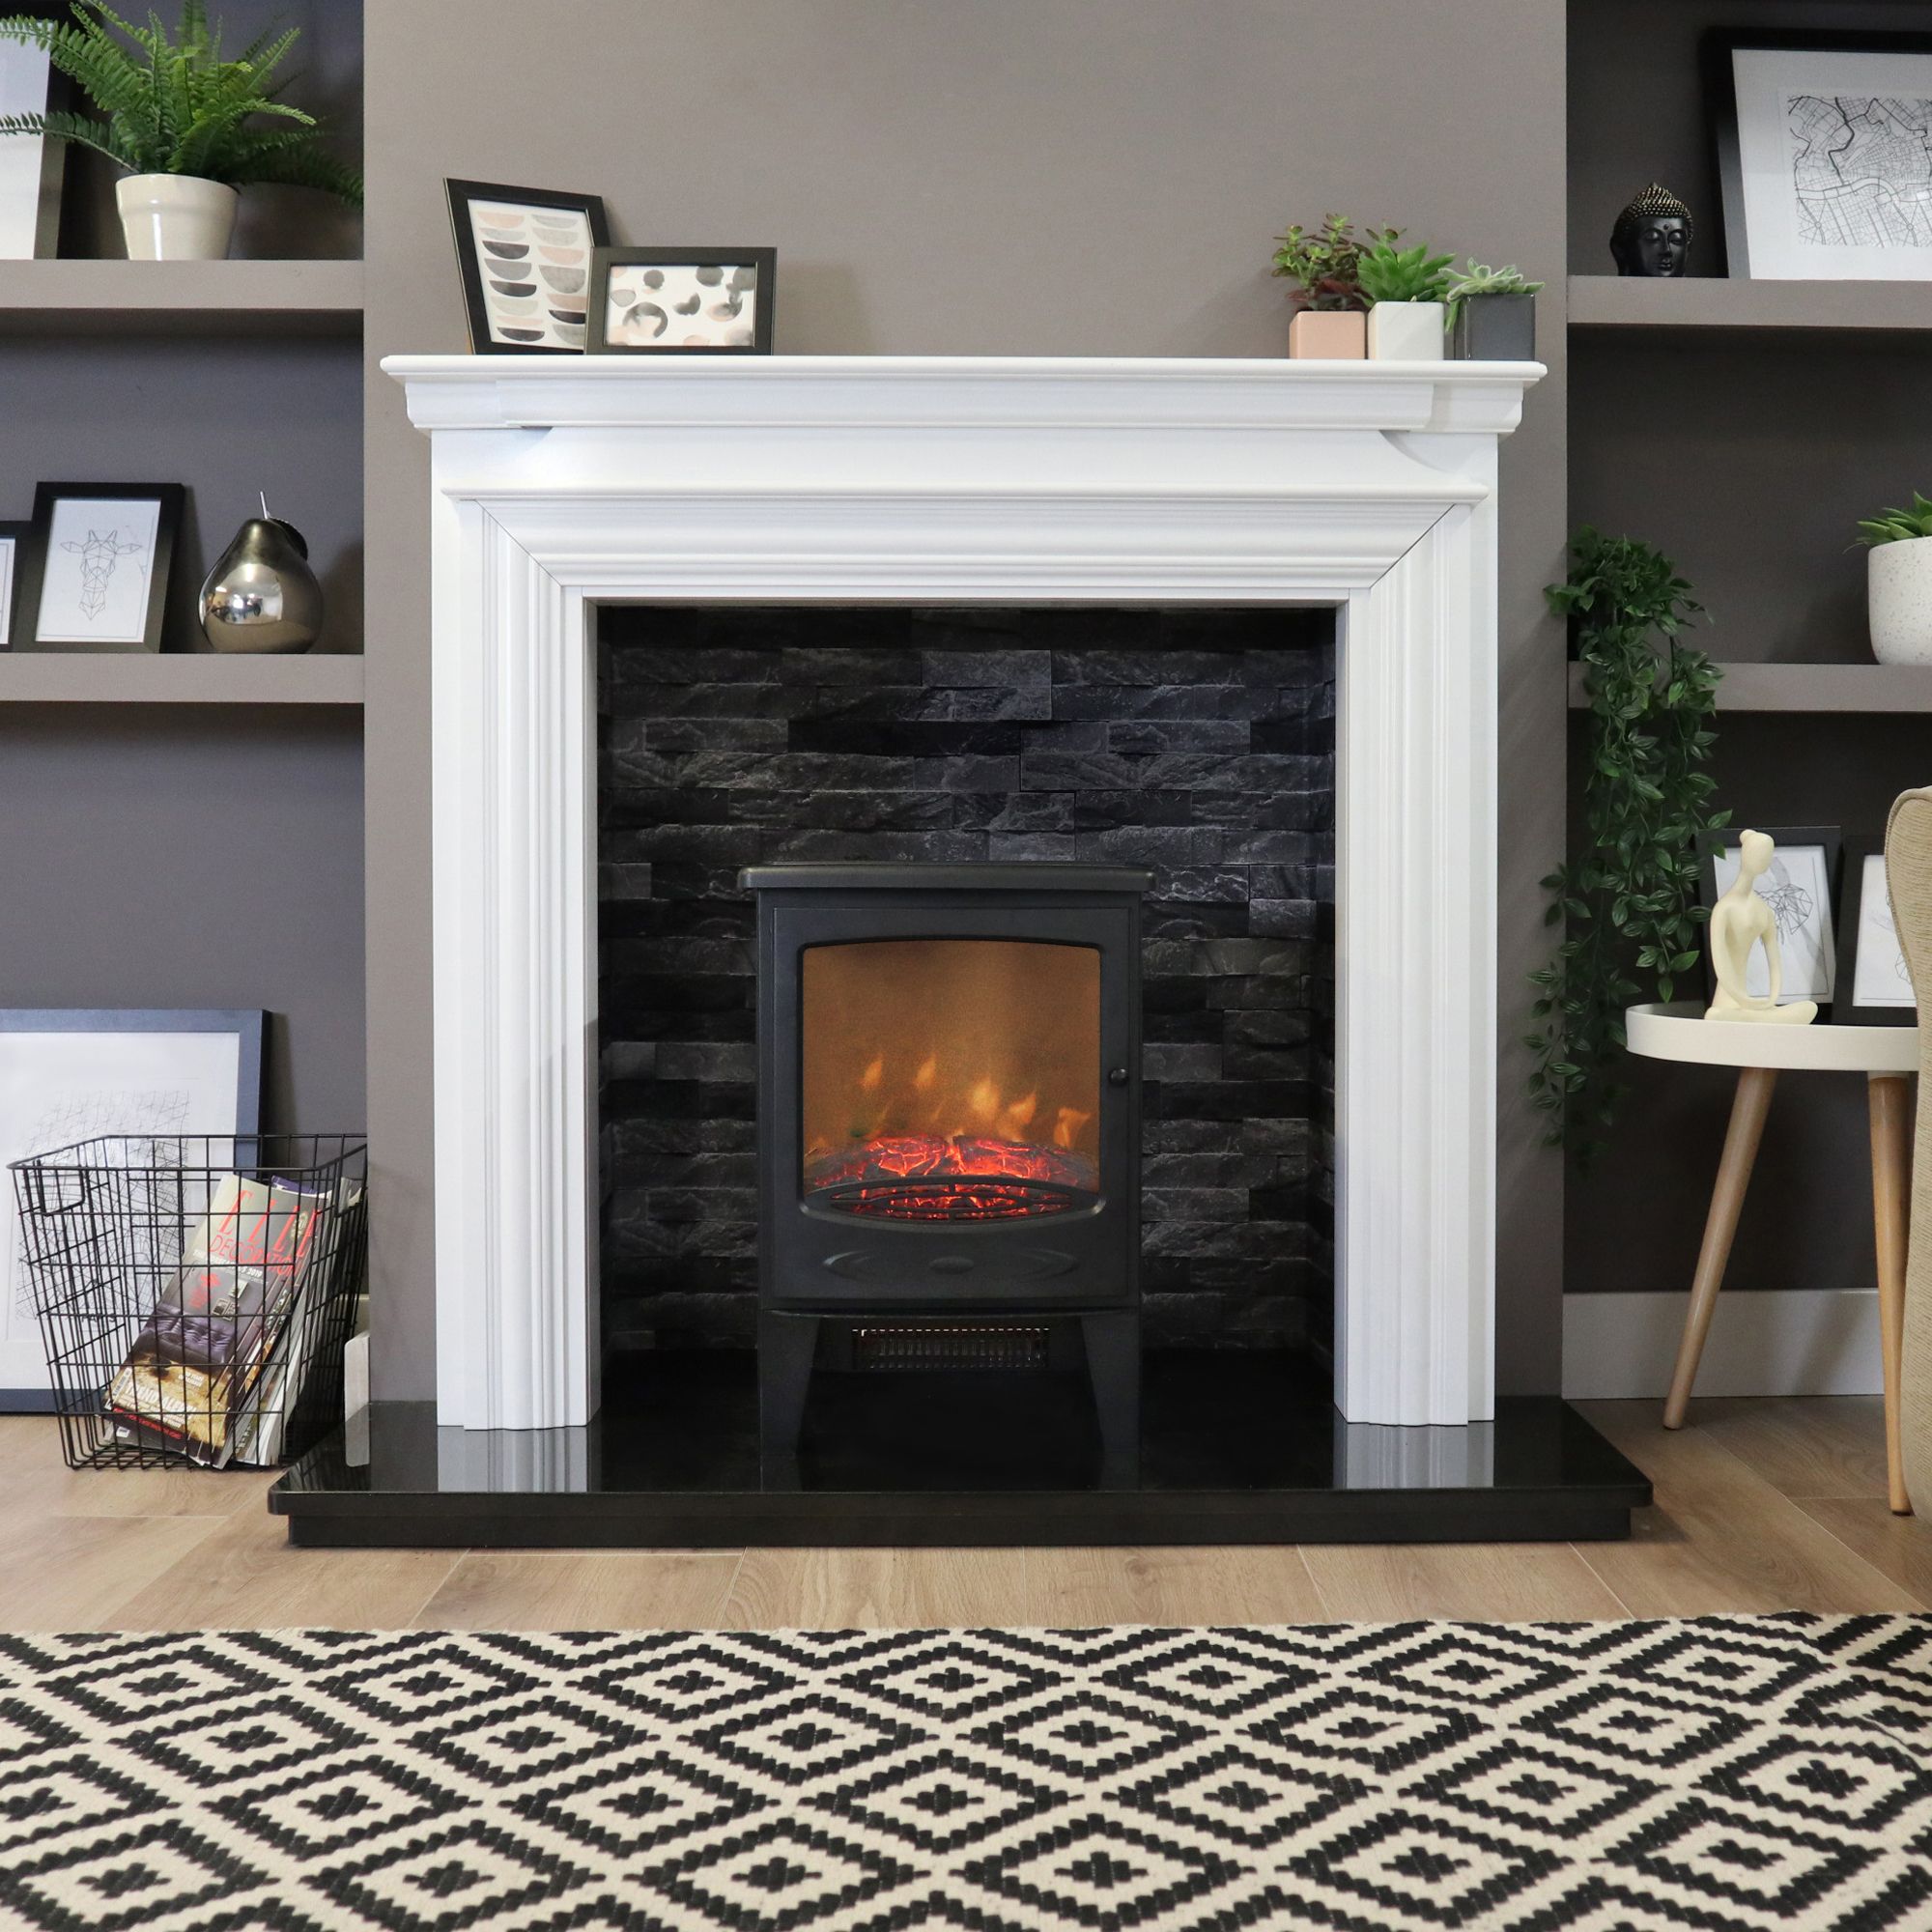 Focal Point Malmo 1.8kW Matt Black Cast iron effect Electric Stove